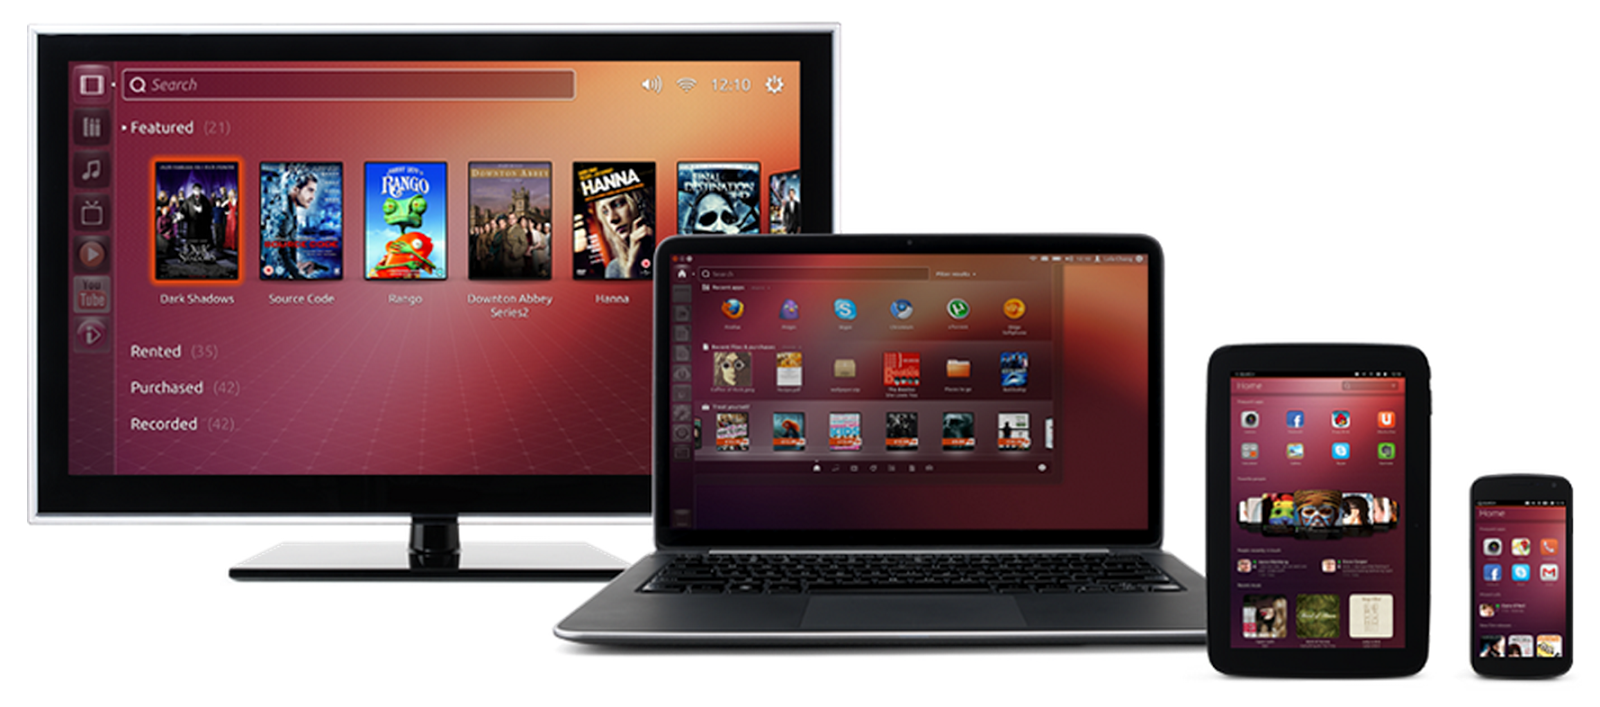 In depth interview: Ubuntu Touch aims to learn from Android's mistakes